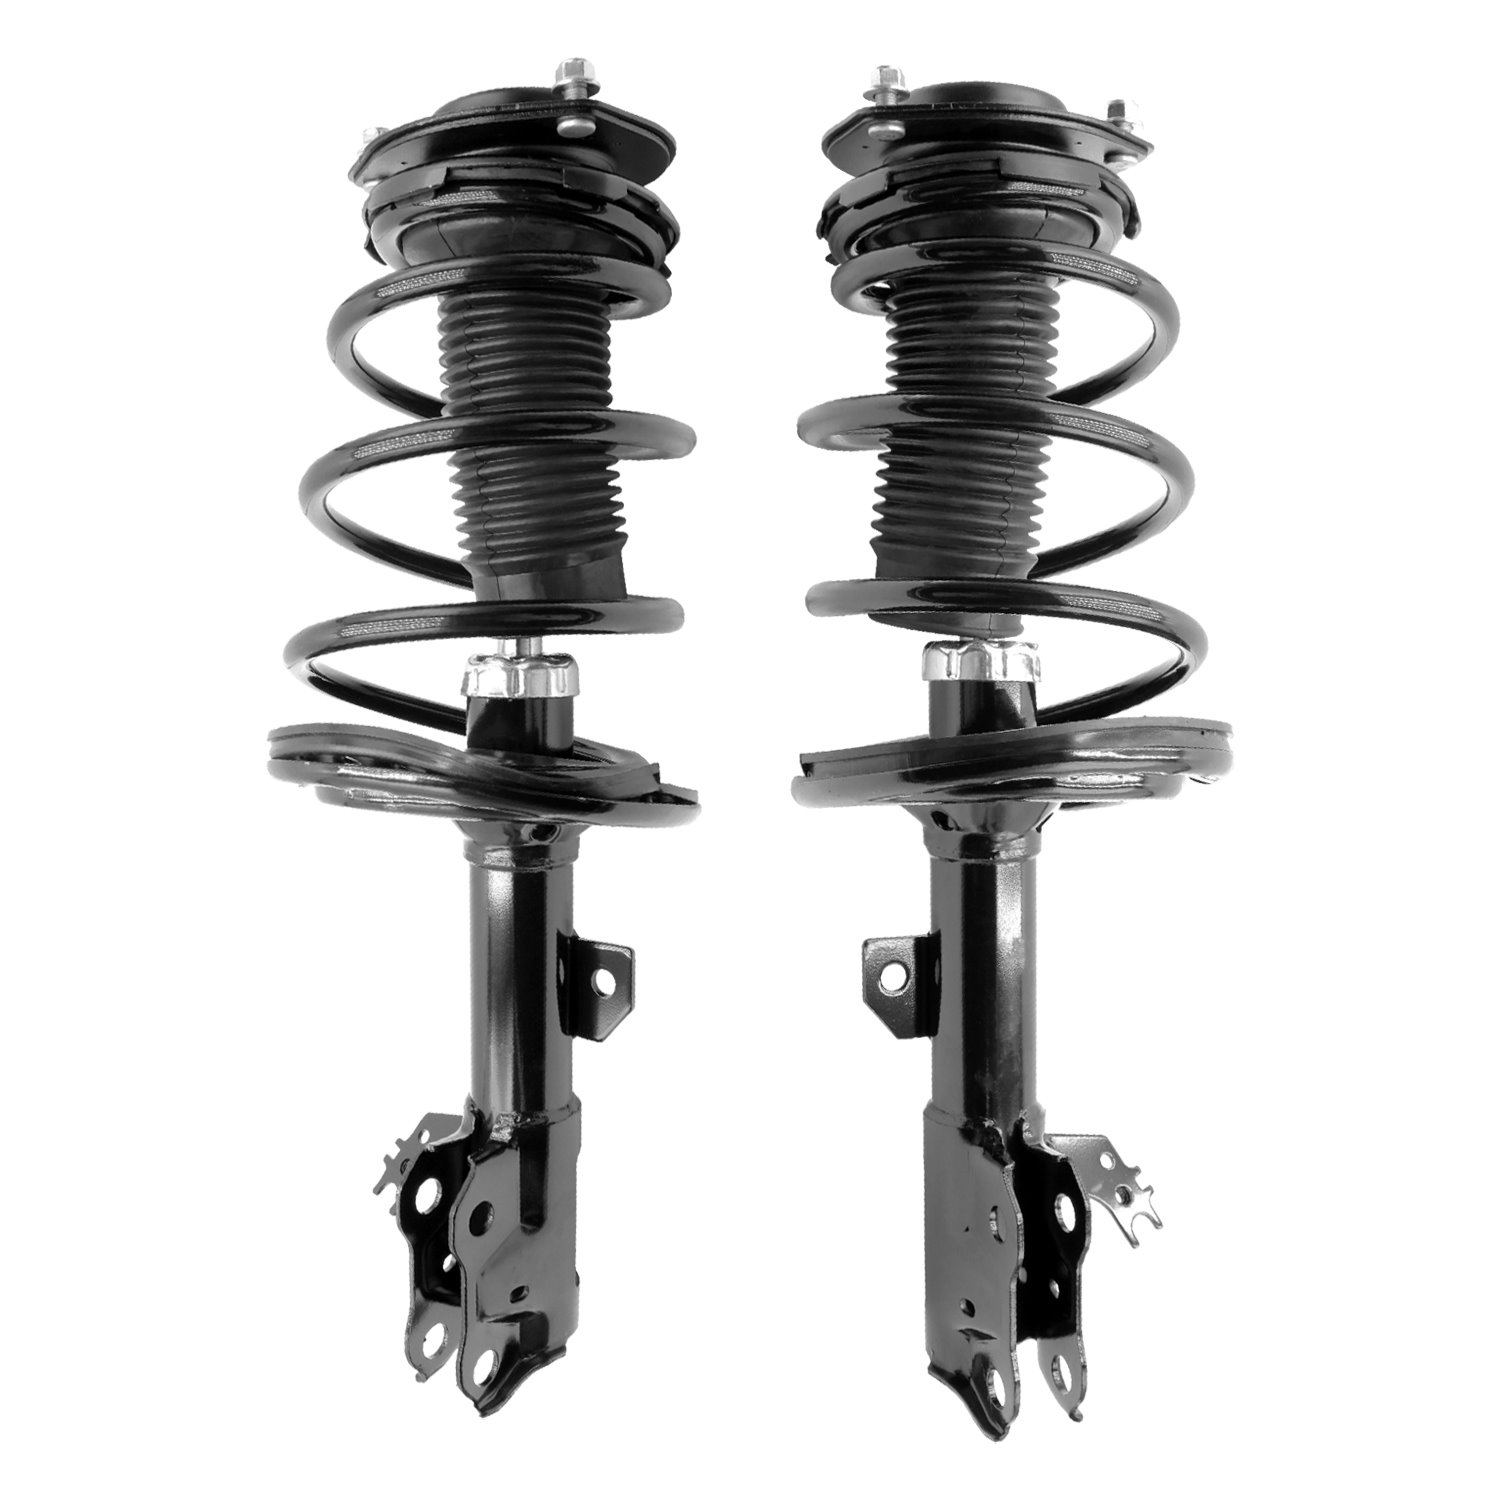 2-13283-13284-001 Front Suspension Strut & Coil Spring Assemby Set Fits Select Toyota Avalon